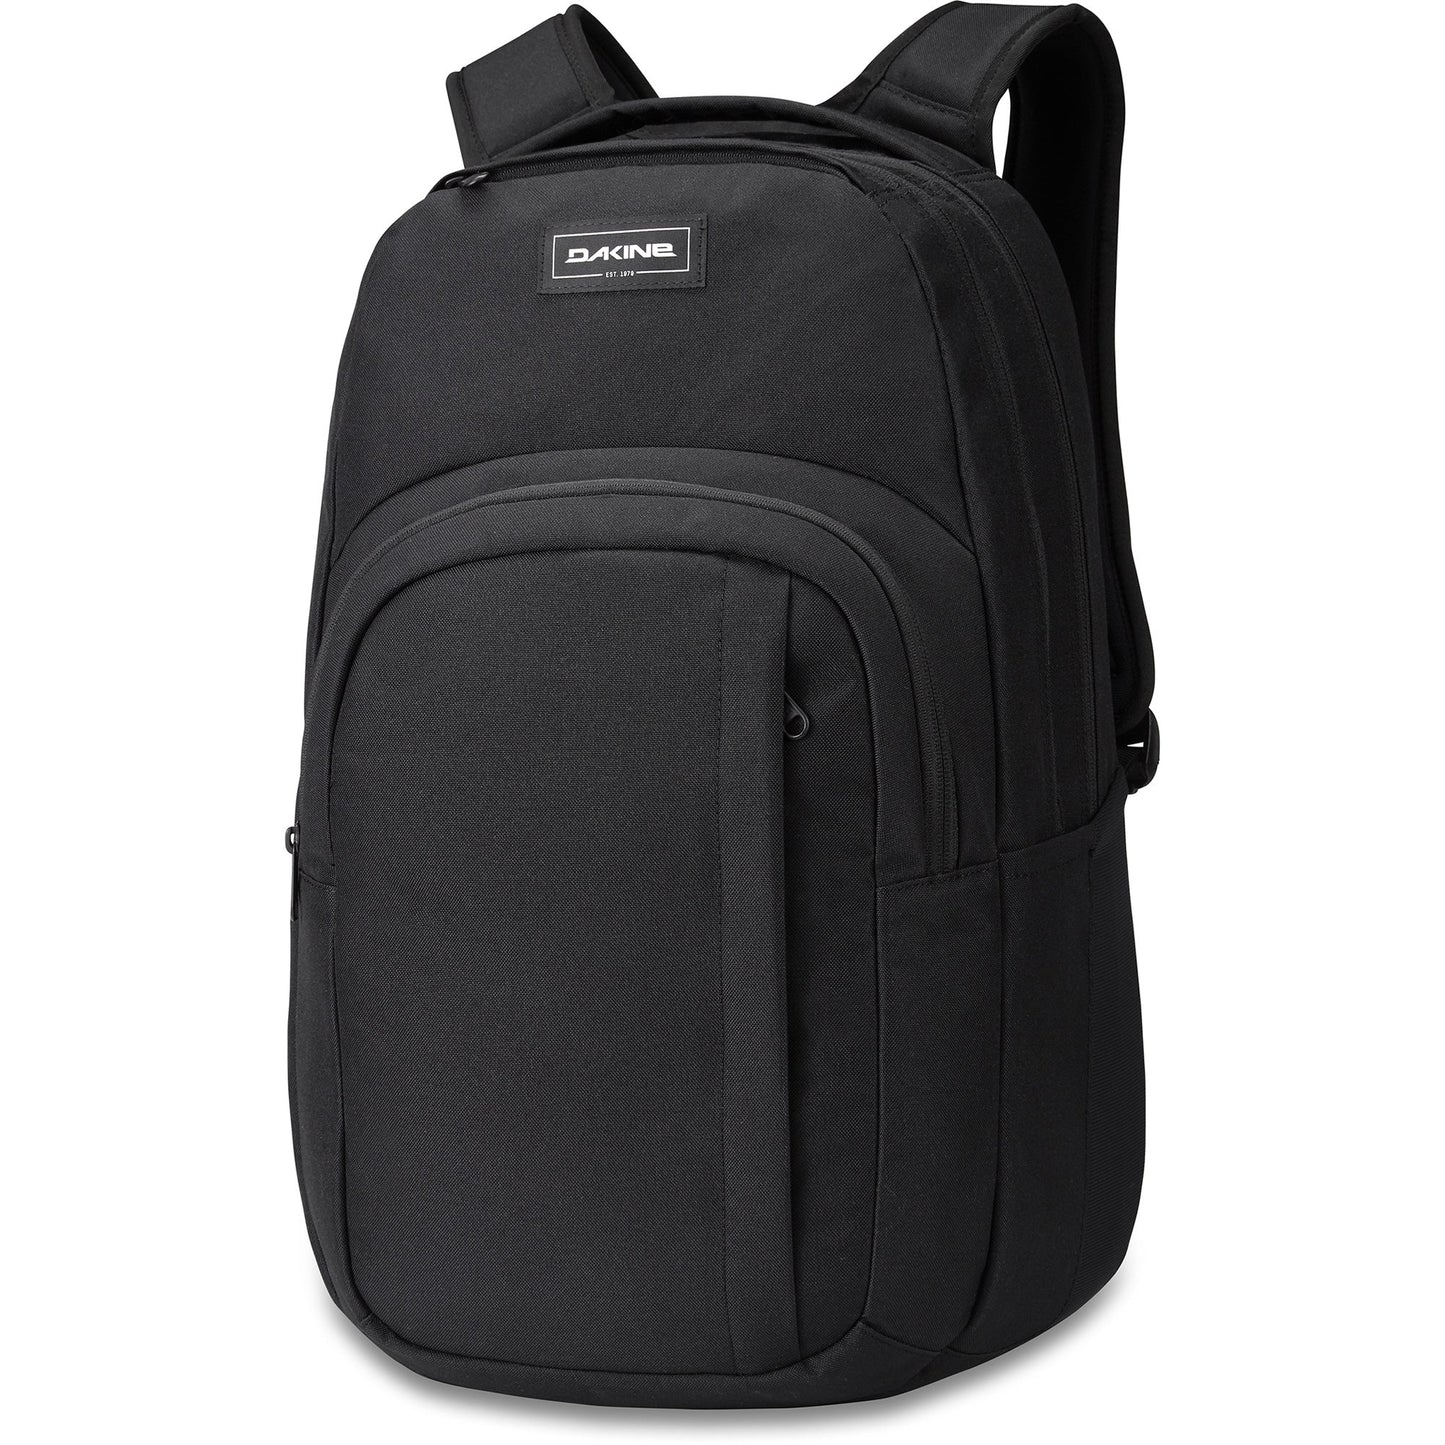 CAMPUS 33L BACKPACK